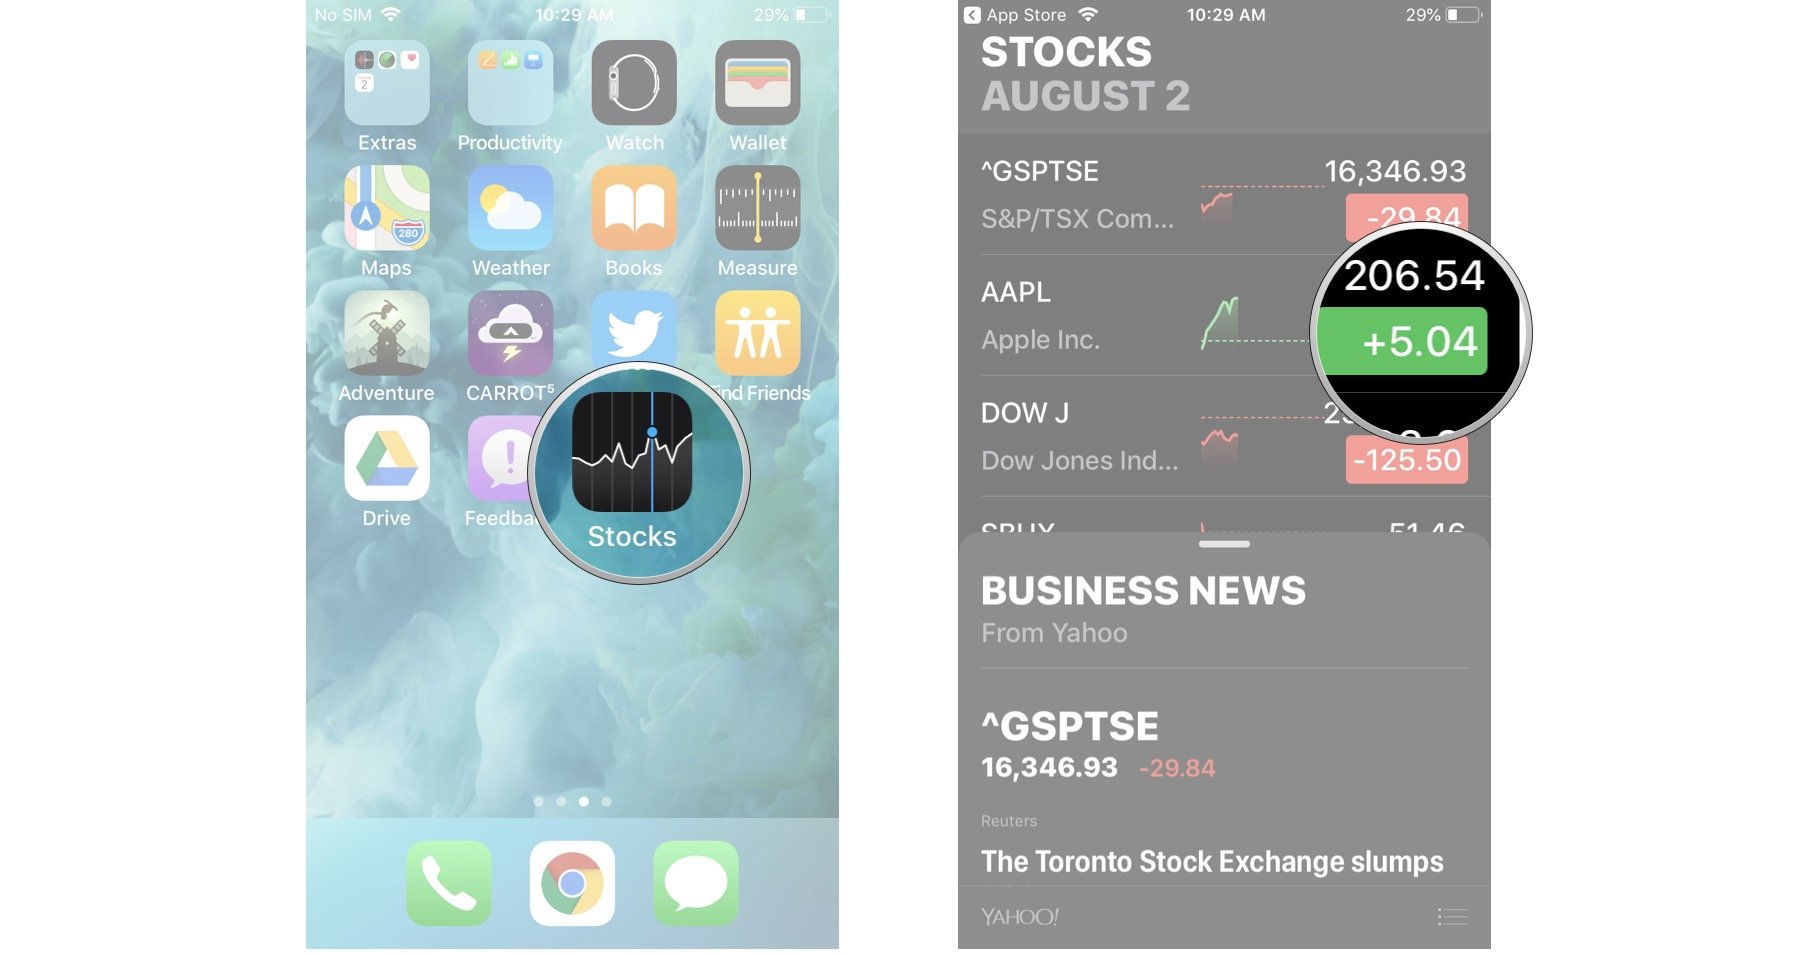 Launch Stocks, tap the values next to each stock